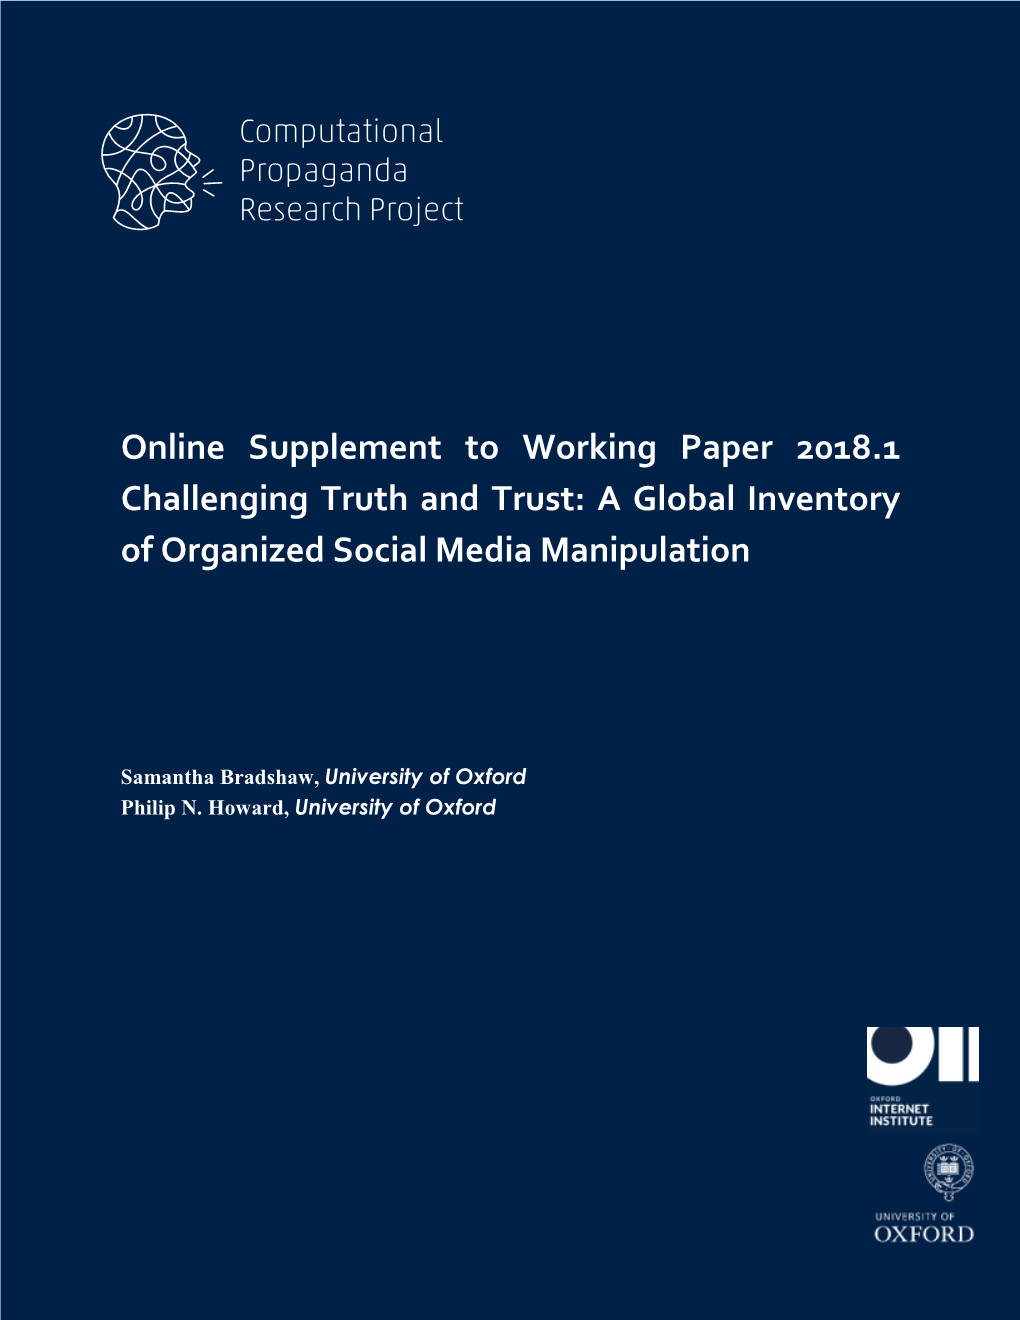 Online Supplement to Working Paper 2018.1 Challenging Truth and Trust: a Global Inventory of Organized Social Media Manipulation